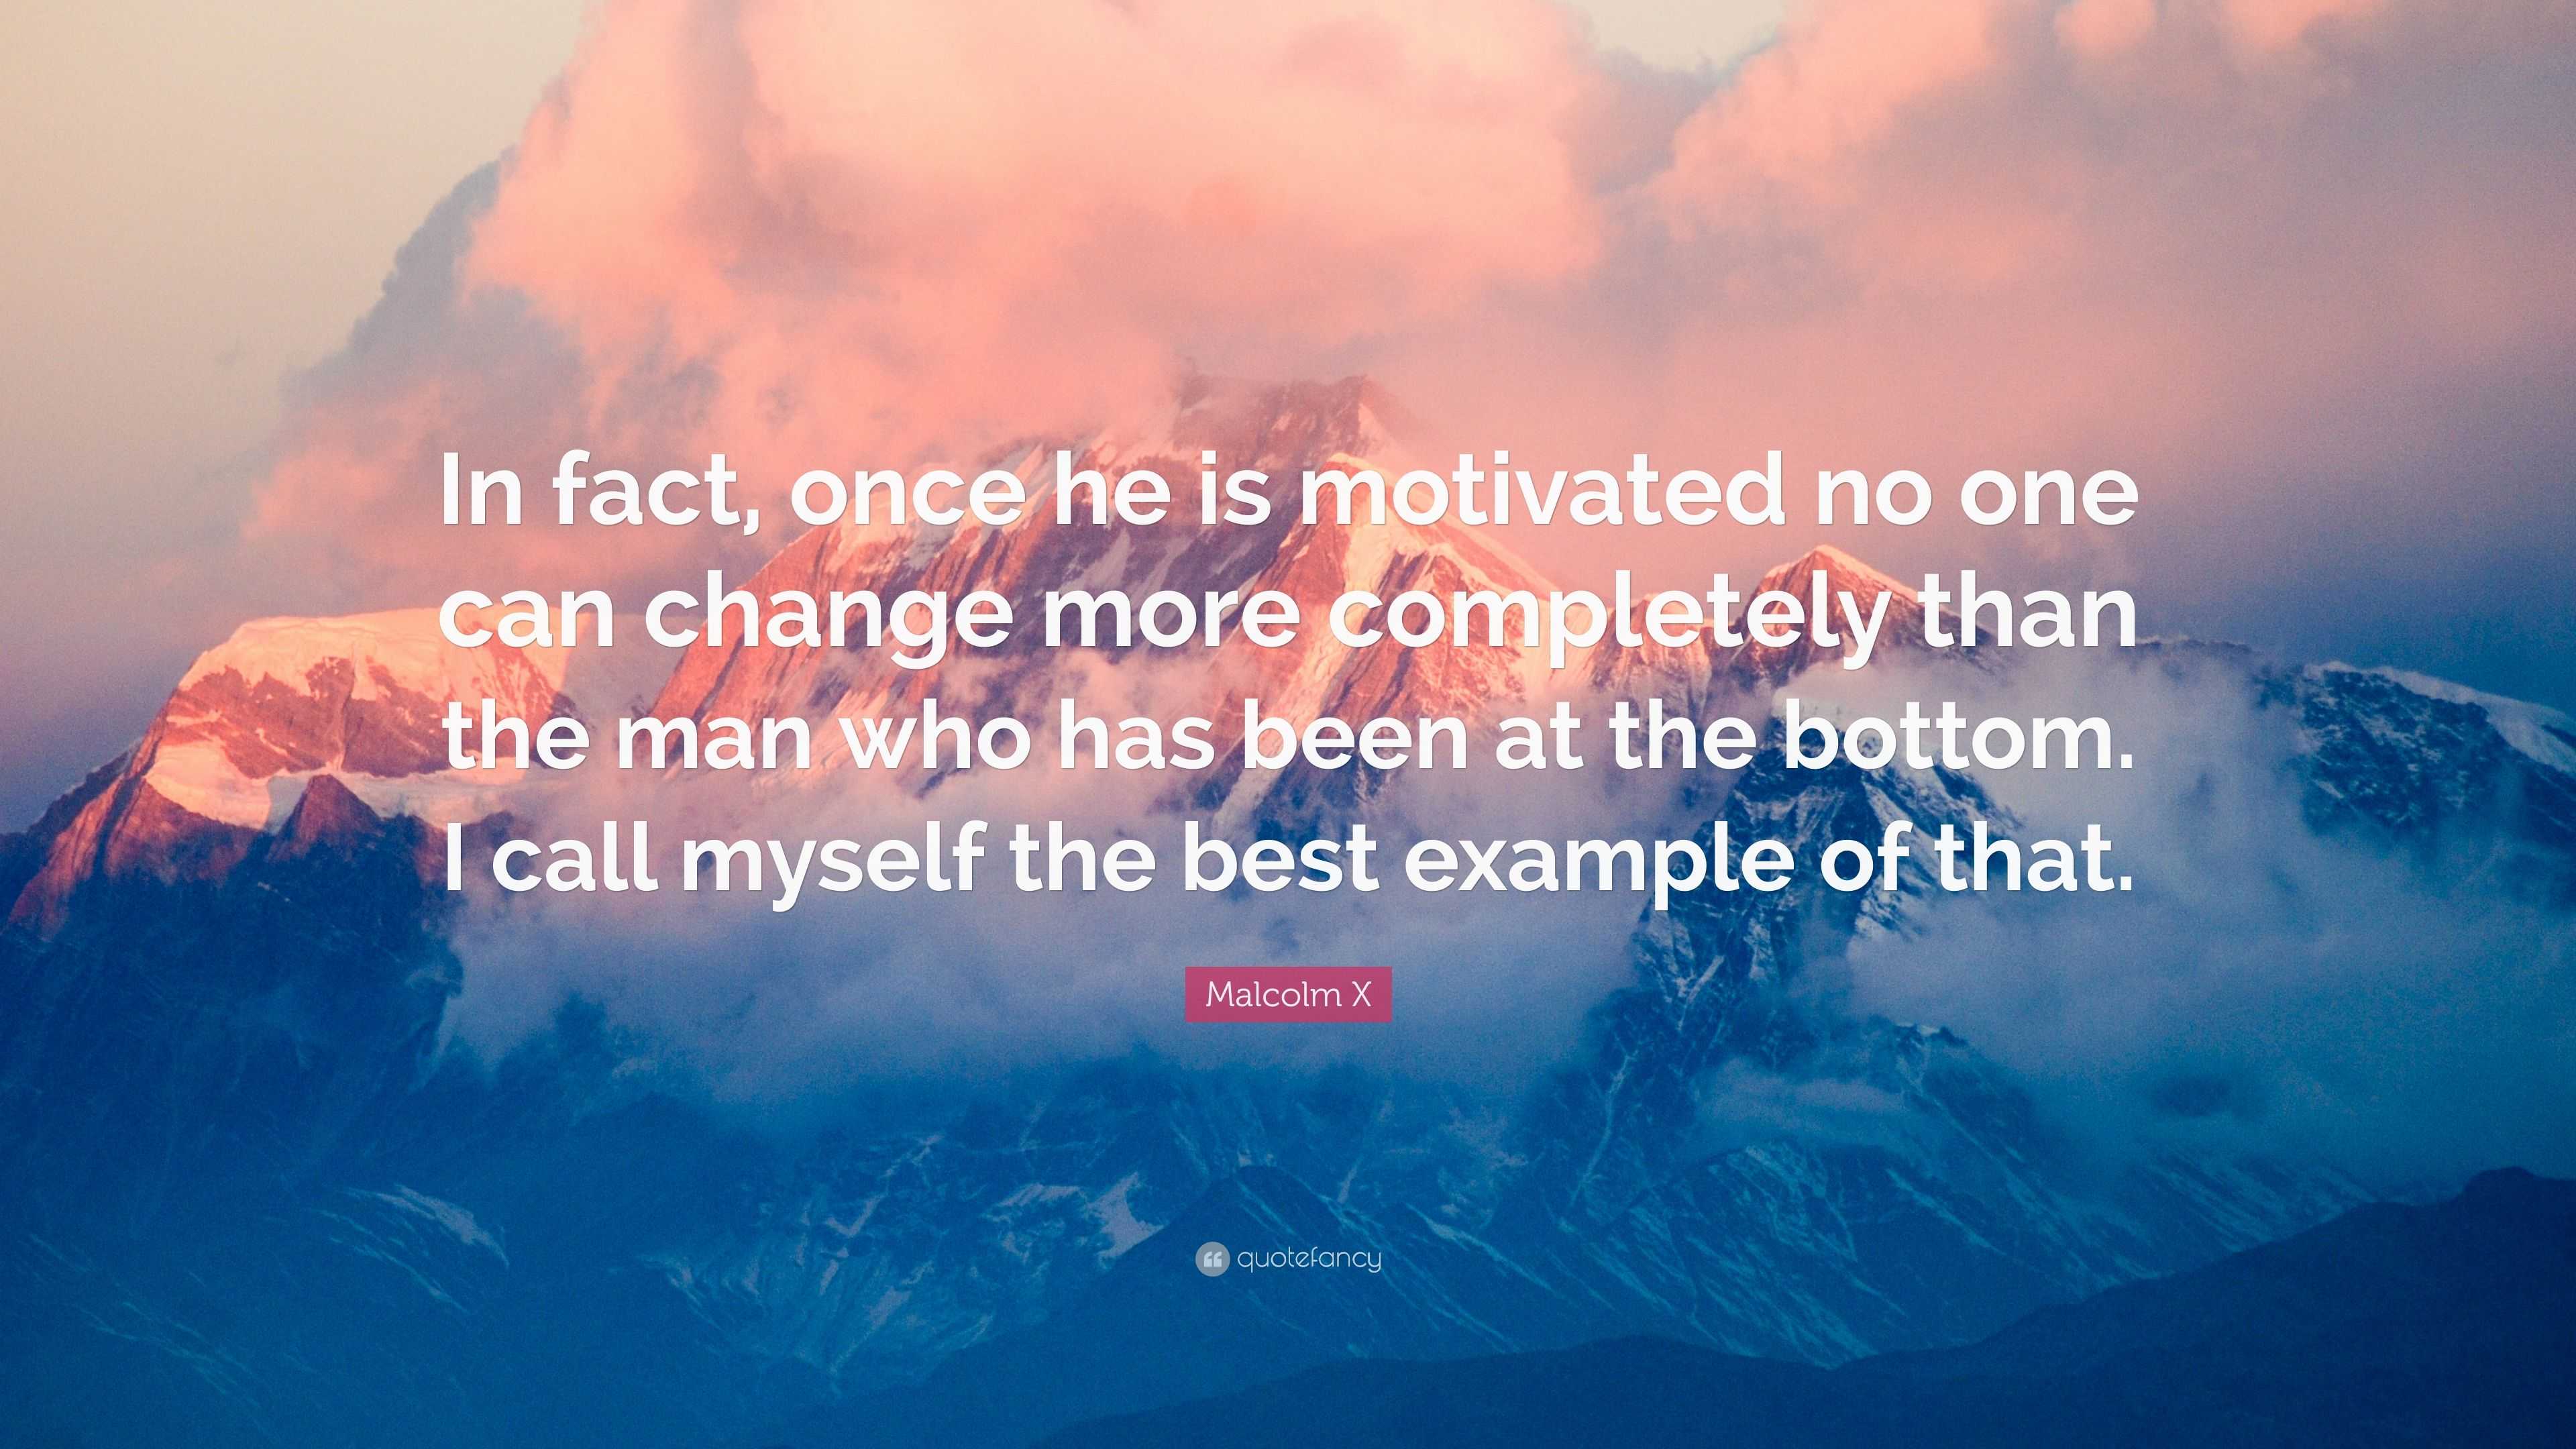 Malcolm X Quote: “In fact, once he is motivated no one can change more ...